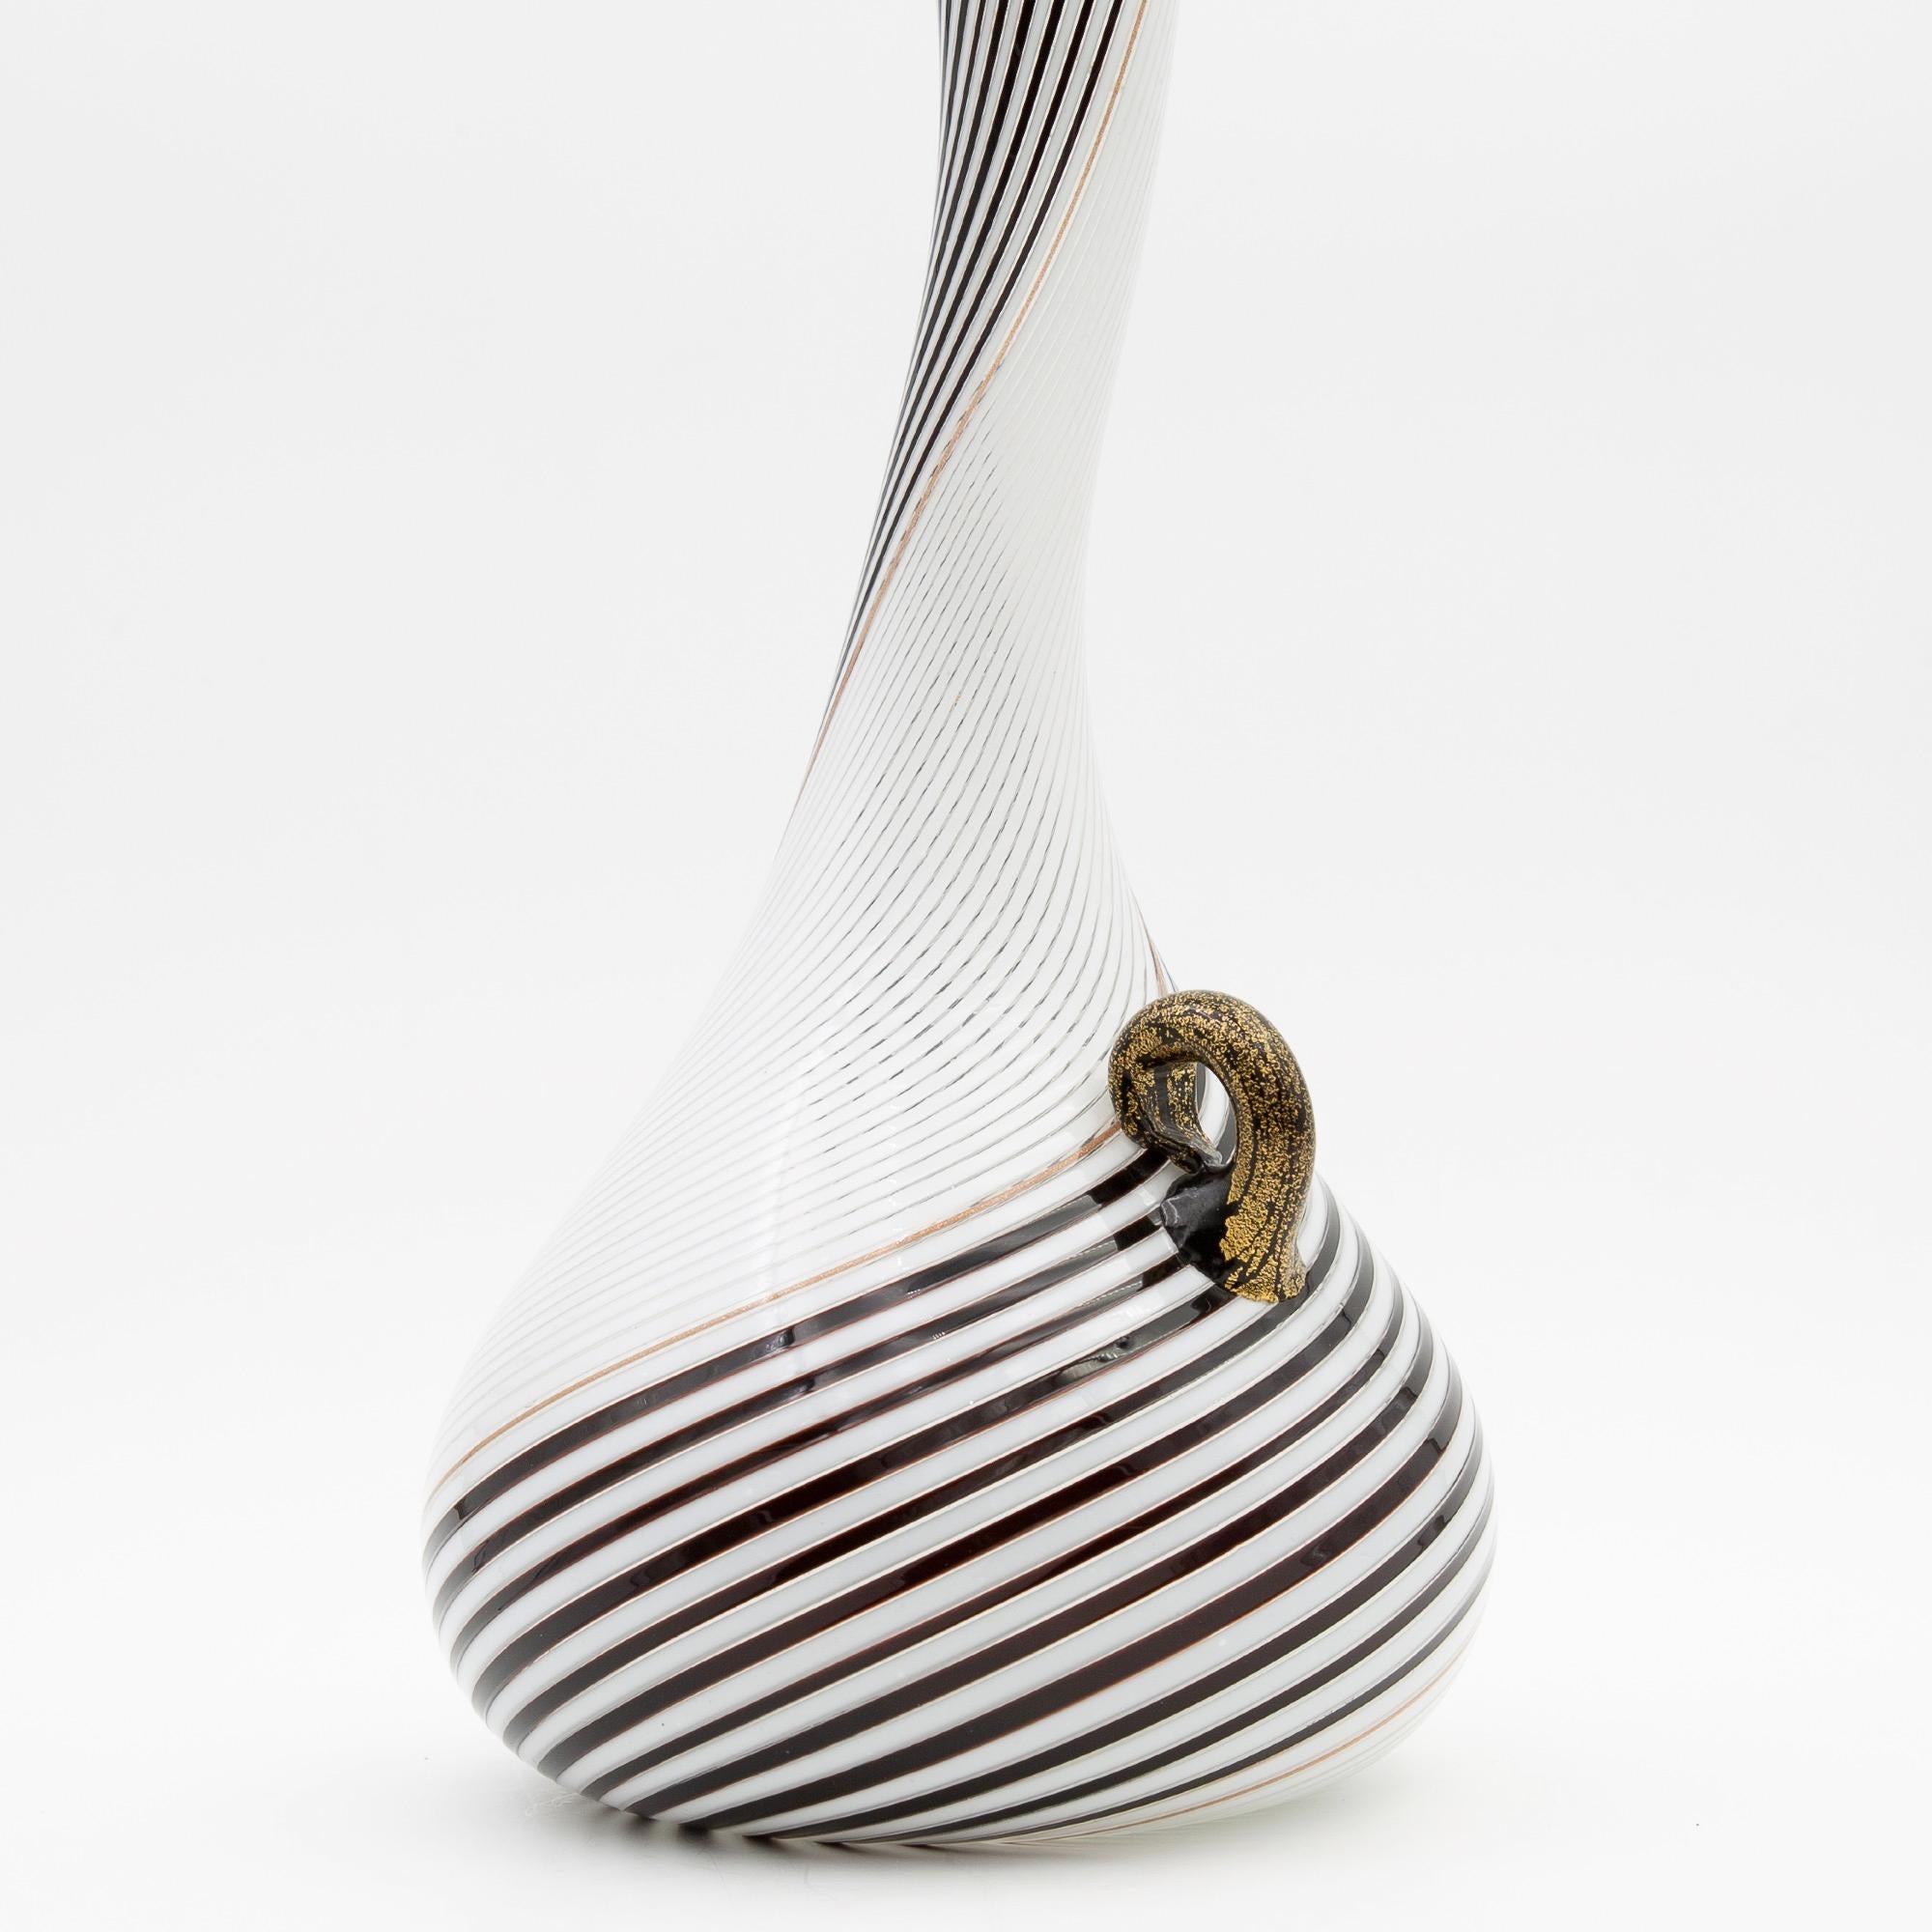 Mezza Filigrana Bianca nera technique blown glass vase
White and black mezza filigrana goose neck vase (Model 5359) - Documented in numerous books on Dino Martens work and Murano glass work in general.
This piece is known as model 5359
The handle